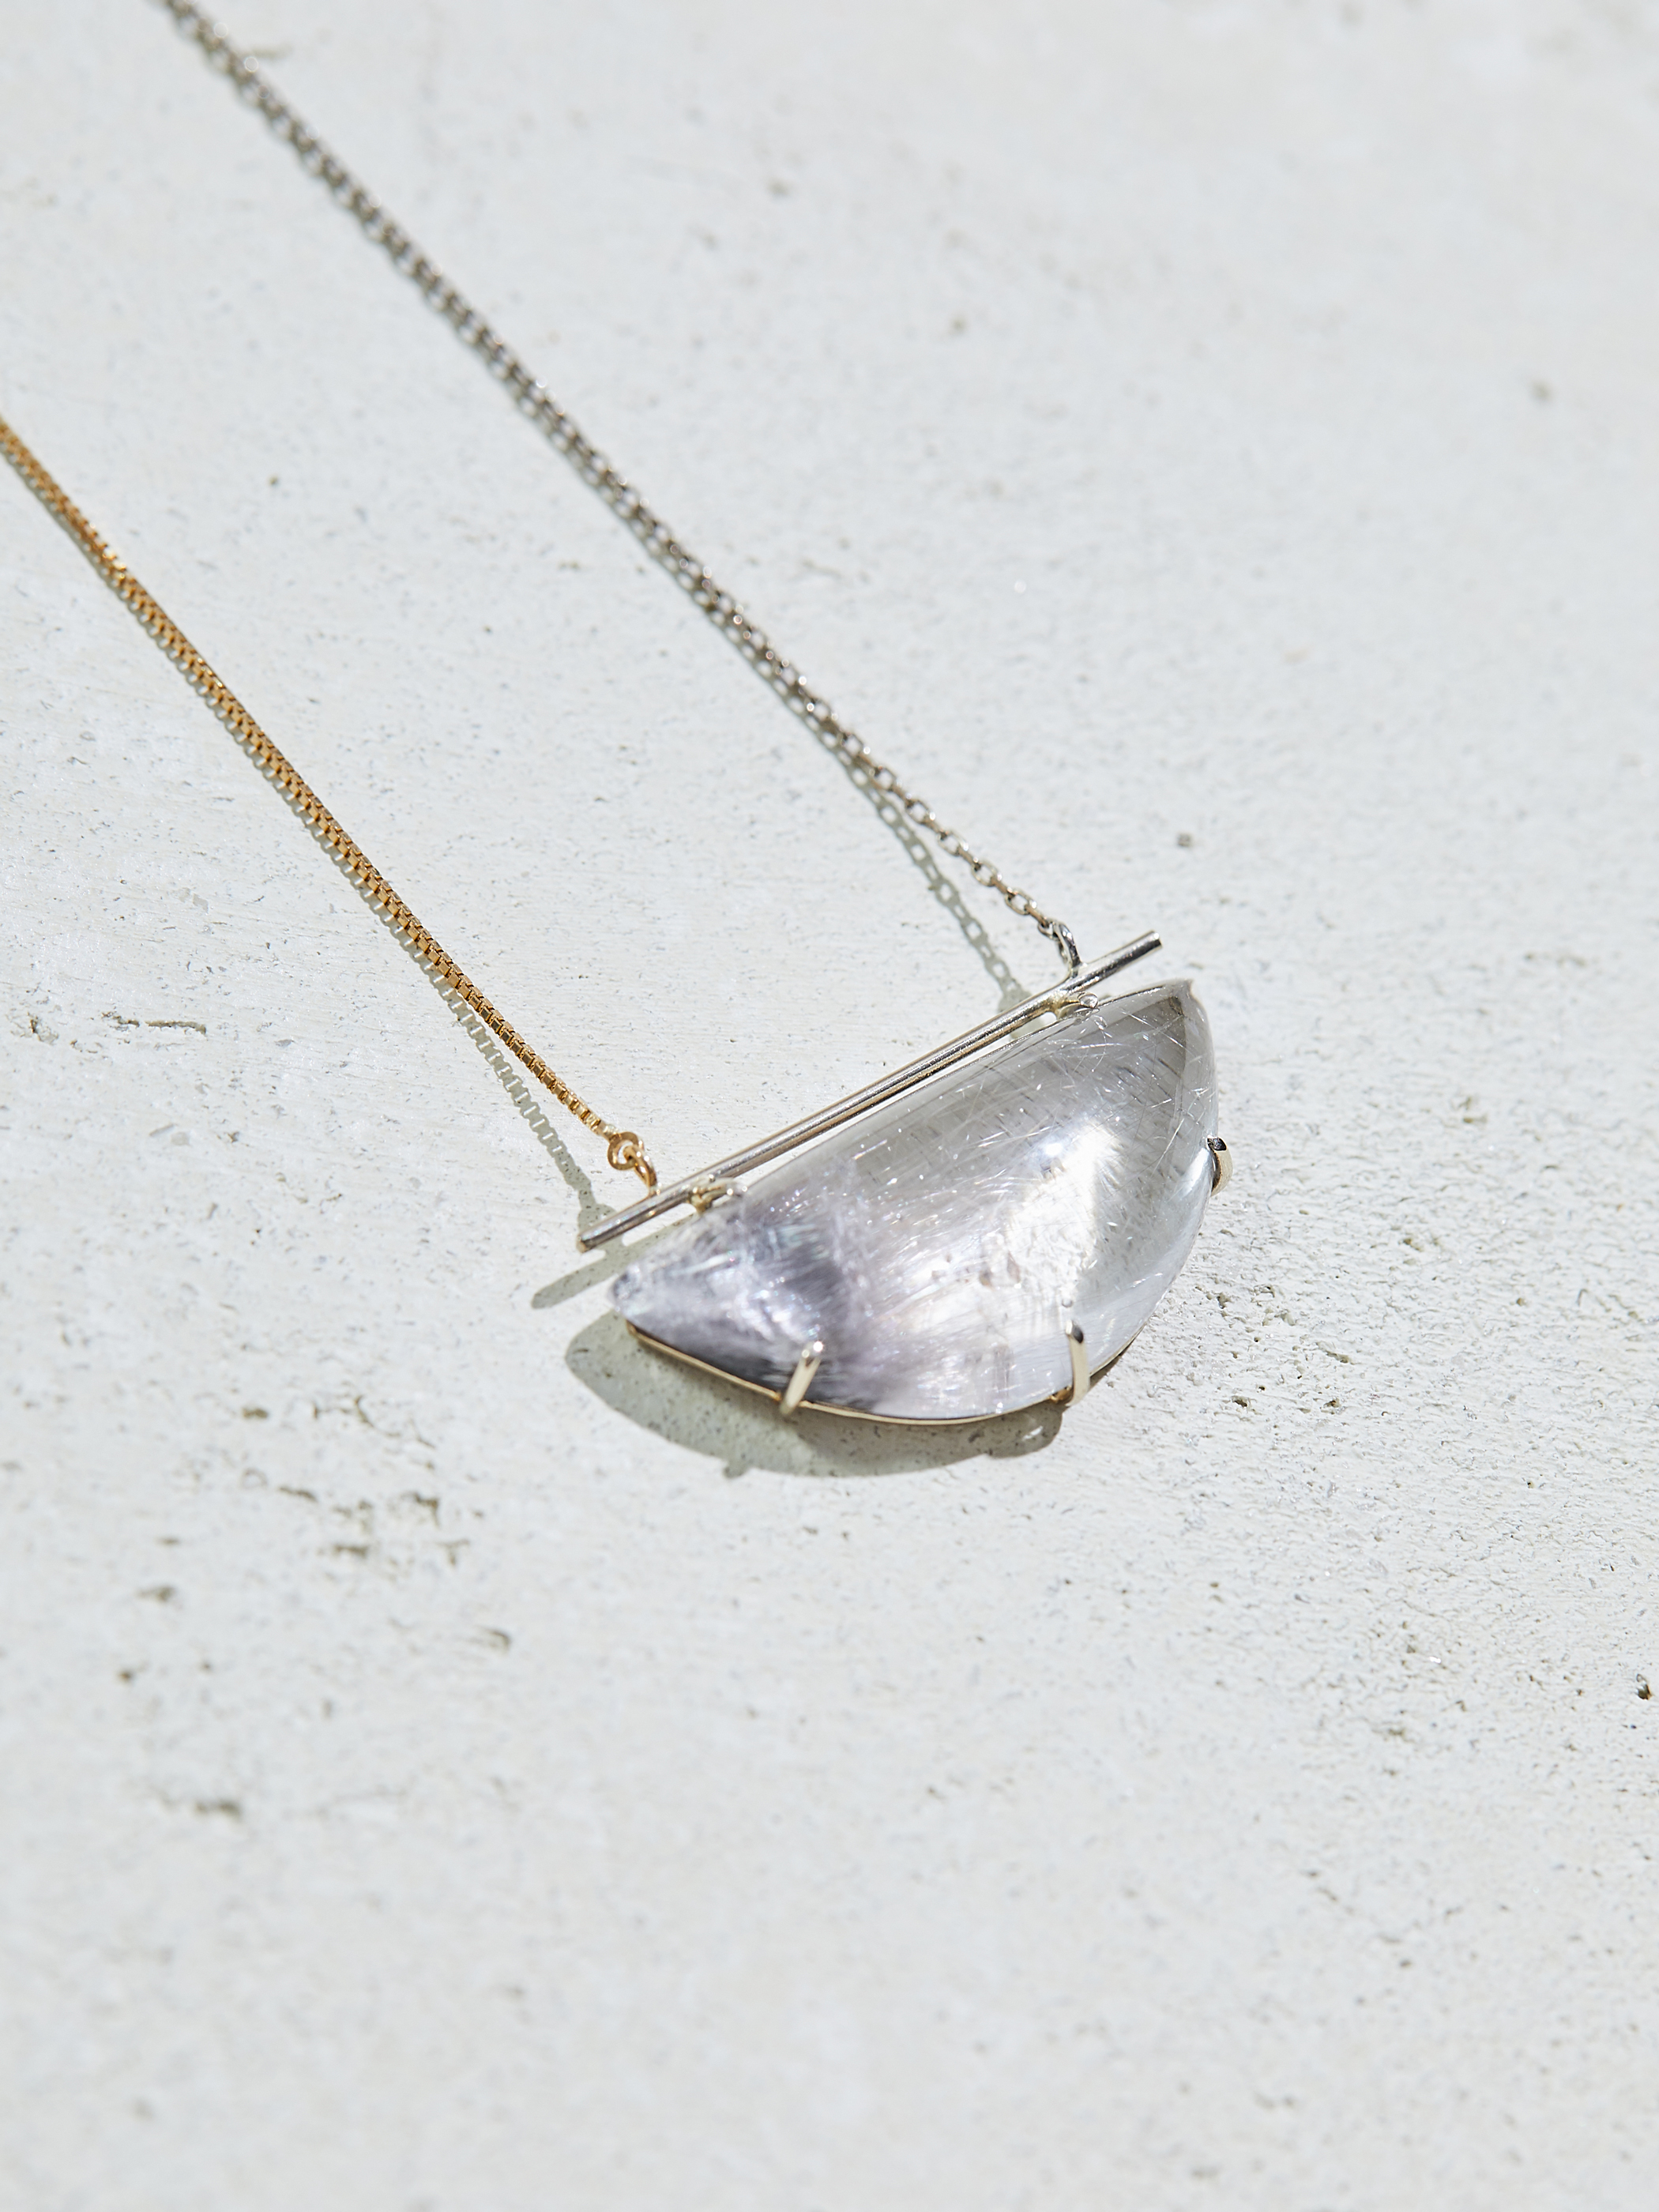 【SOLD OUT】BROOKITE IN QUARTZ NECKLACE